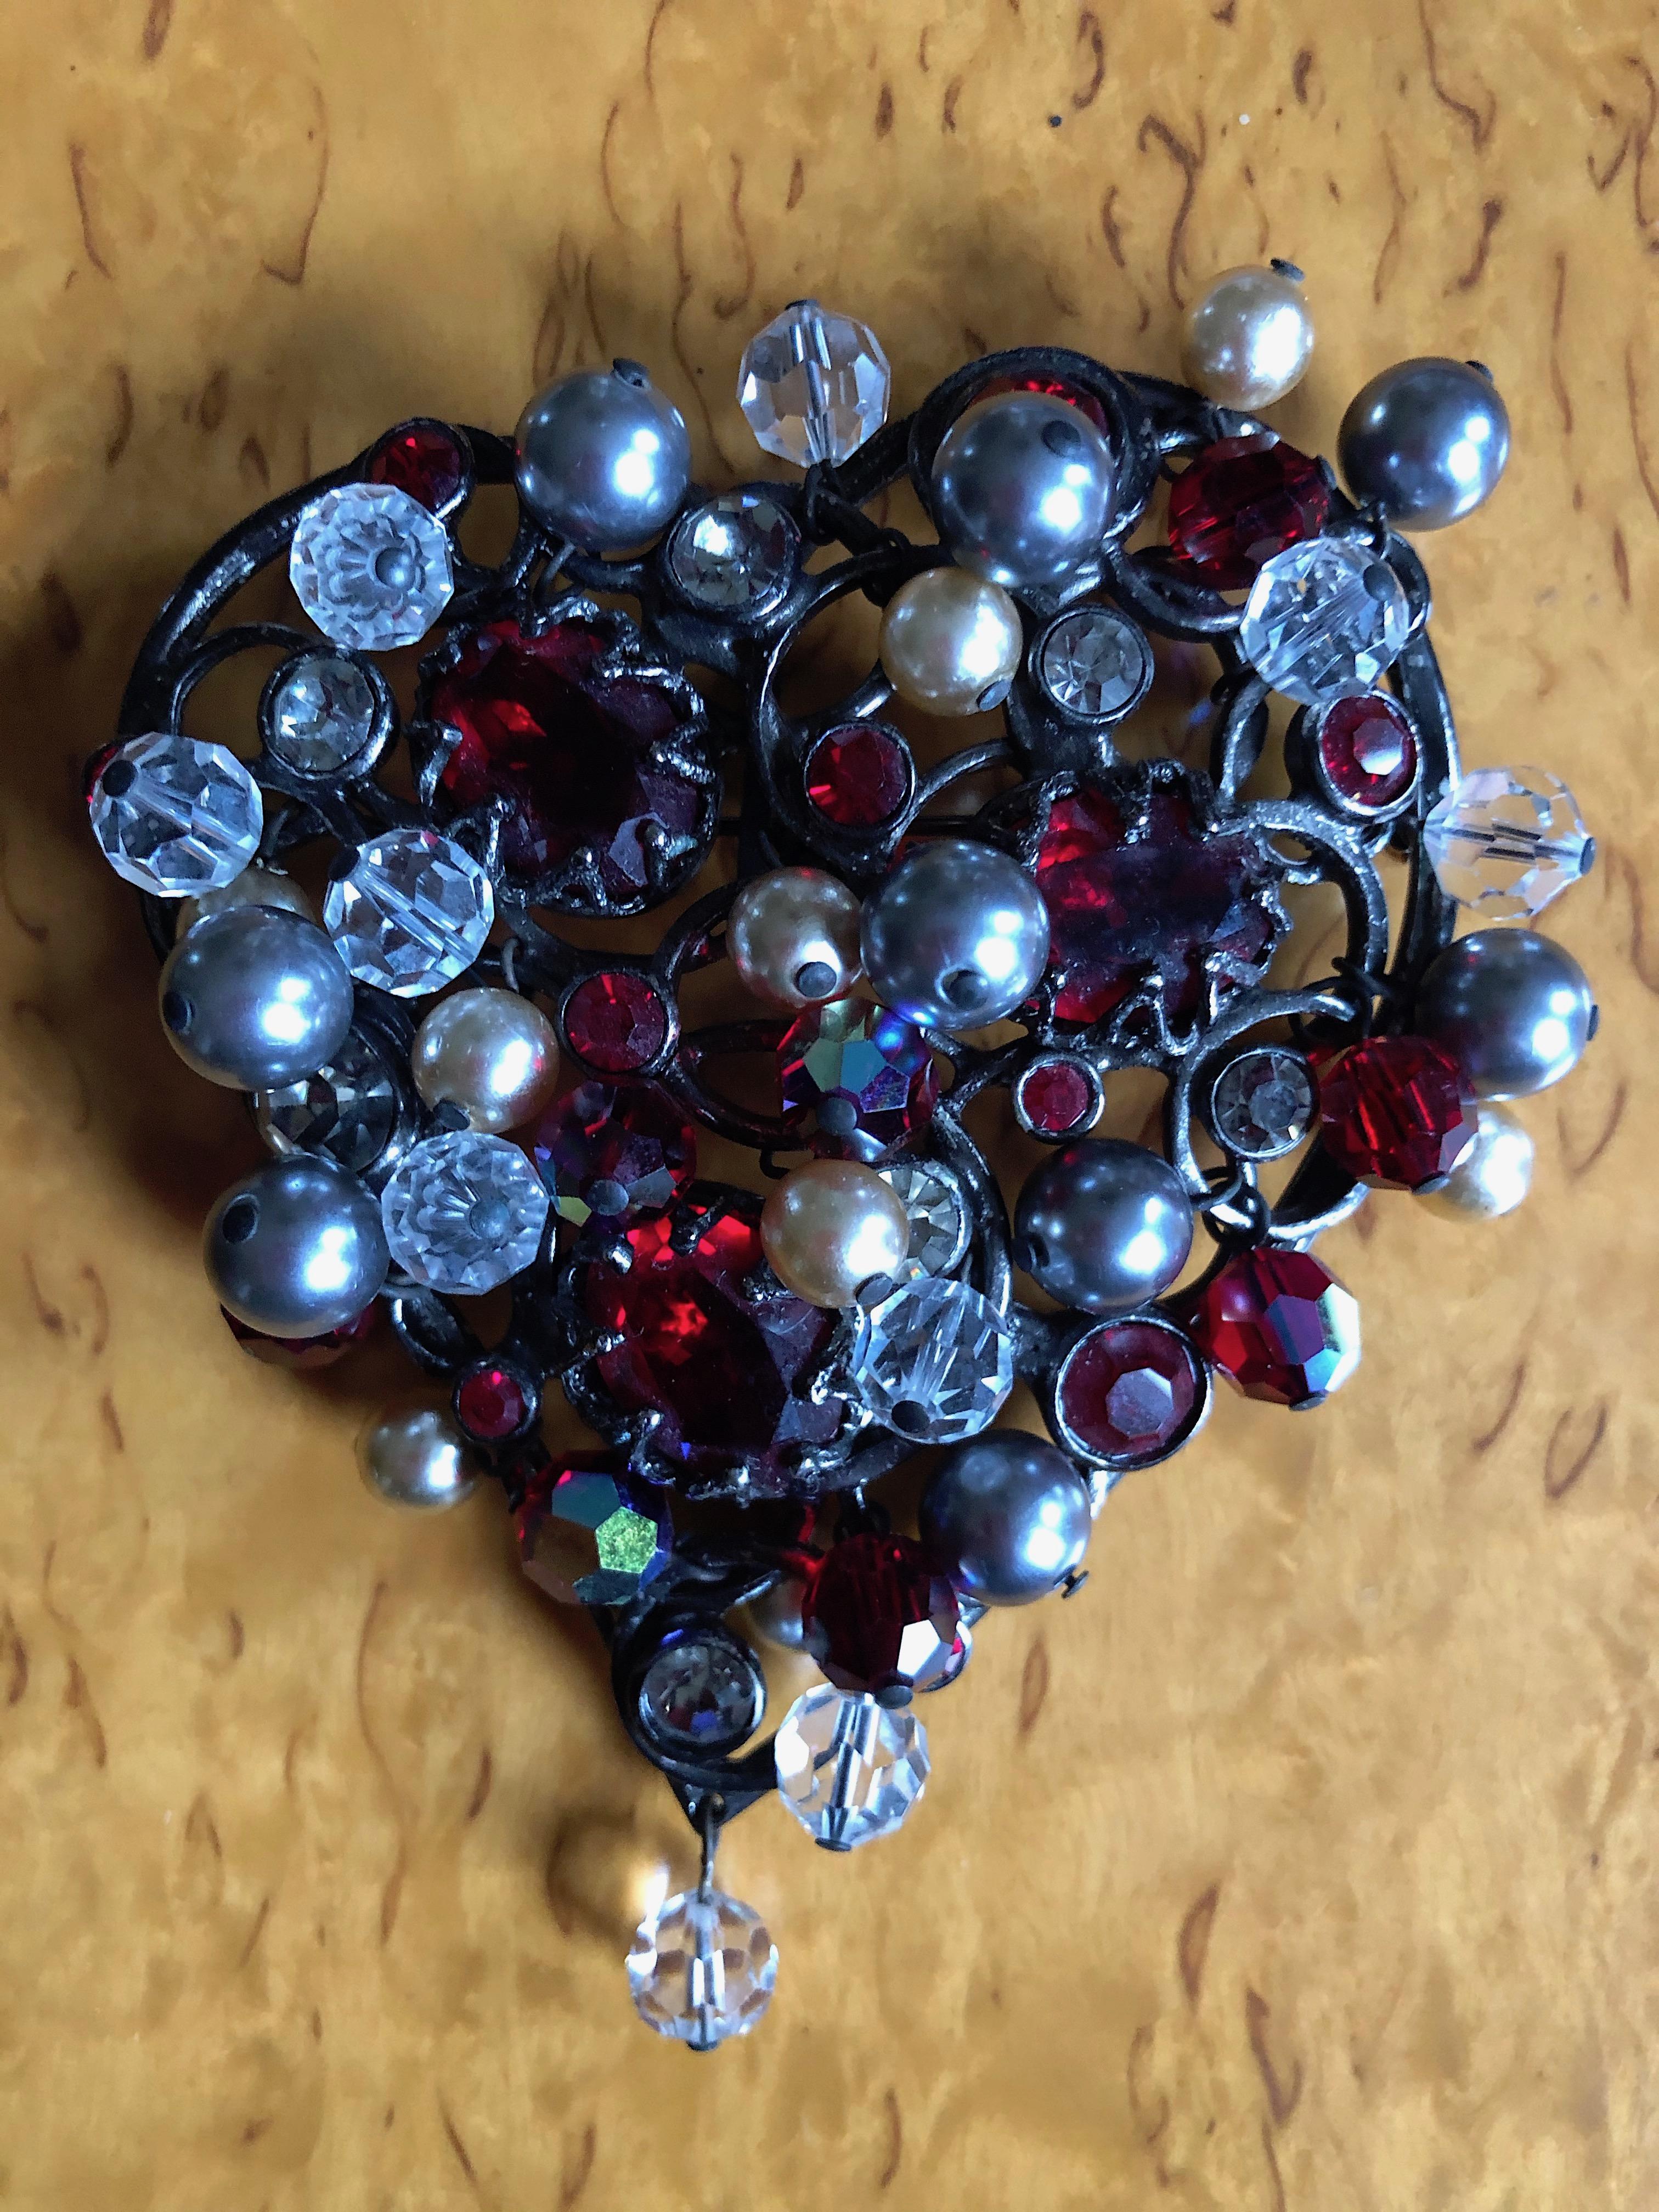 Yves Saint Laurent Rive Gauche Large Heart Pin Brooch with Tremblant Beads In Excellent Condition For Sale In Cloverdale, CA